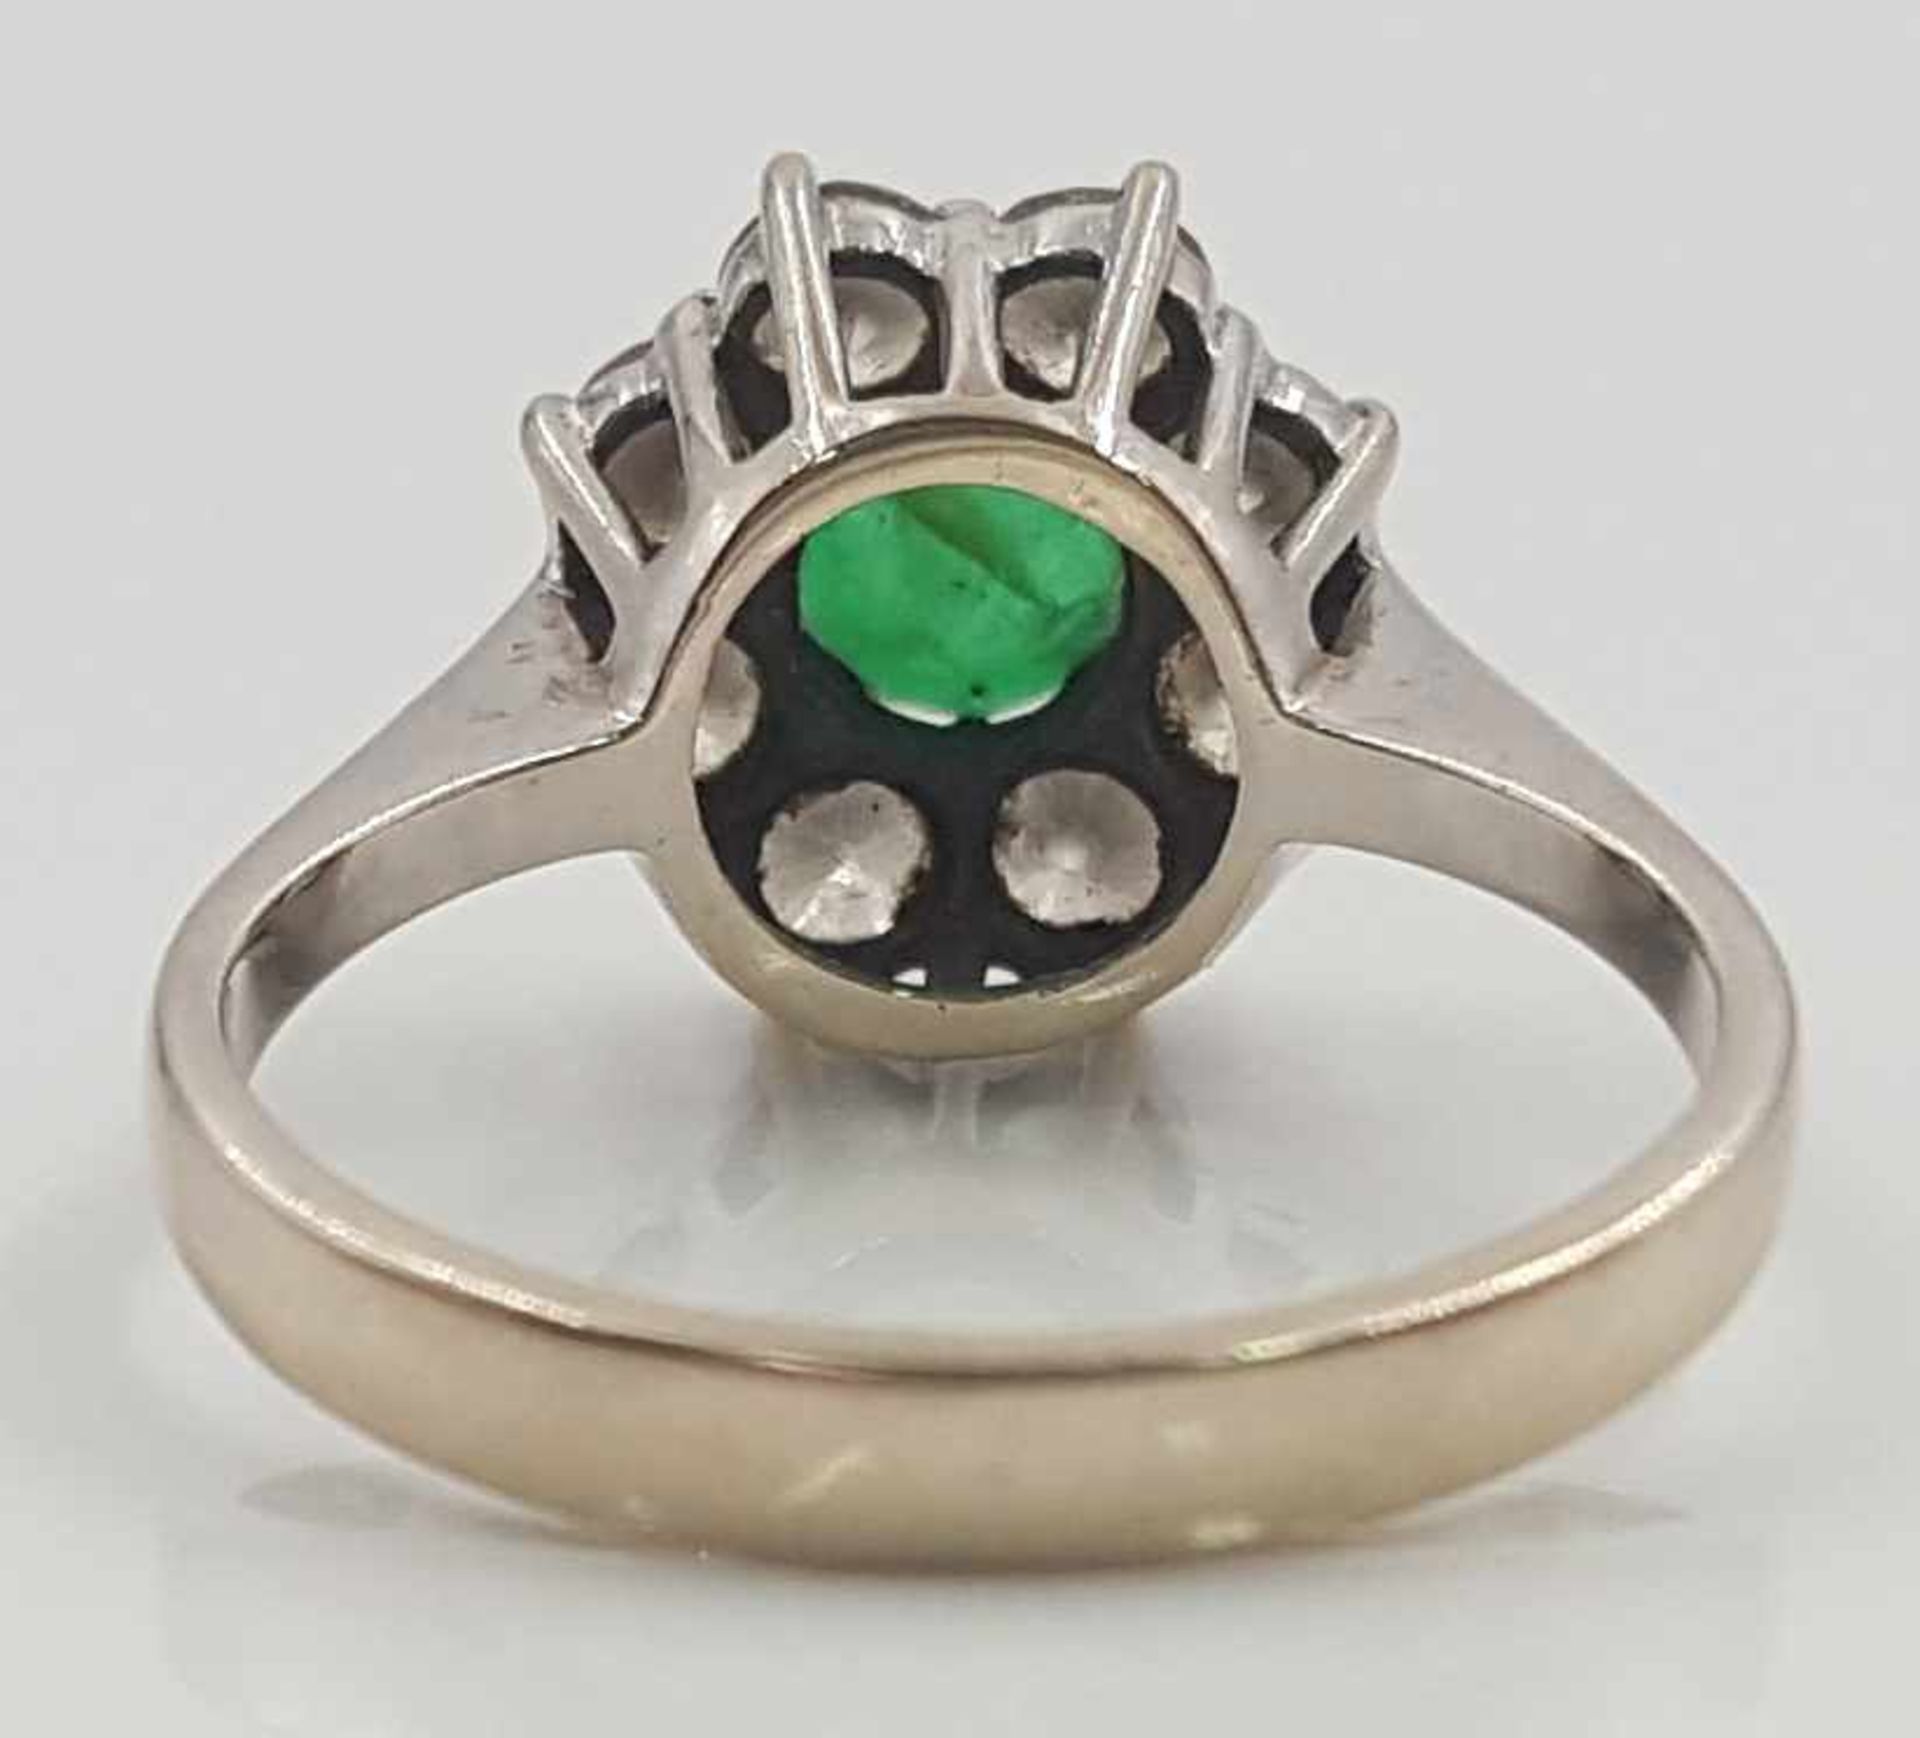 Ring, white gold 585, with central emerald and 8 diamonds. - Image 2 of 7